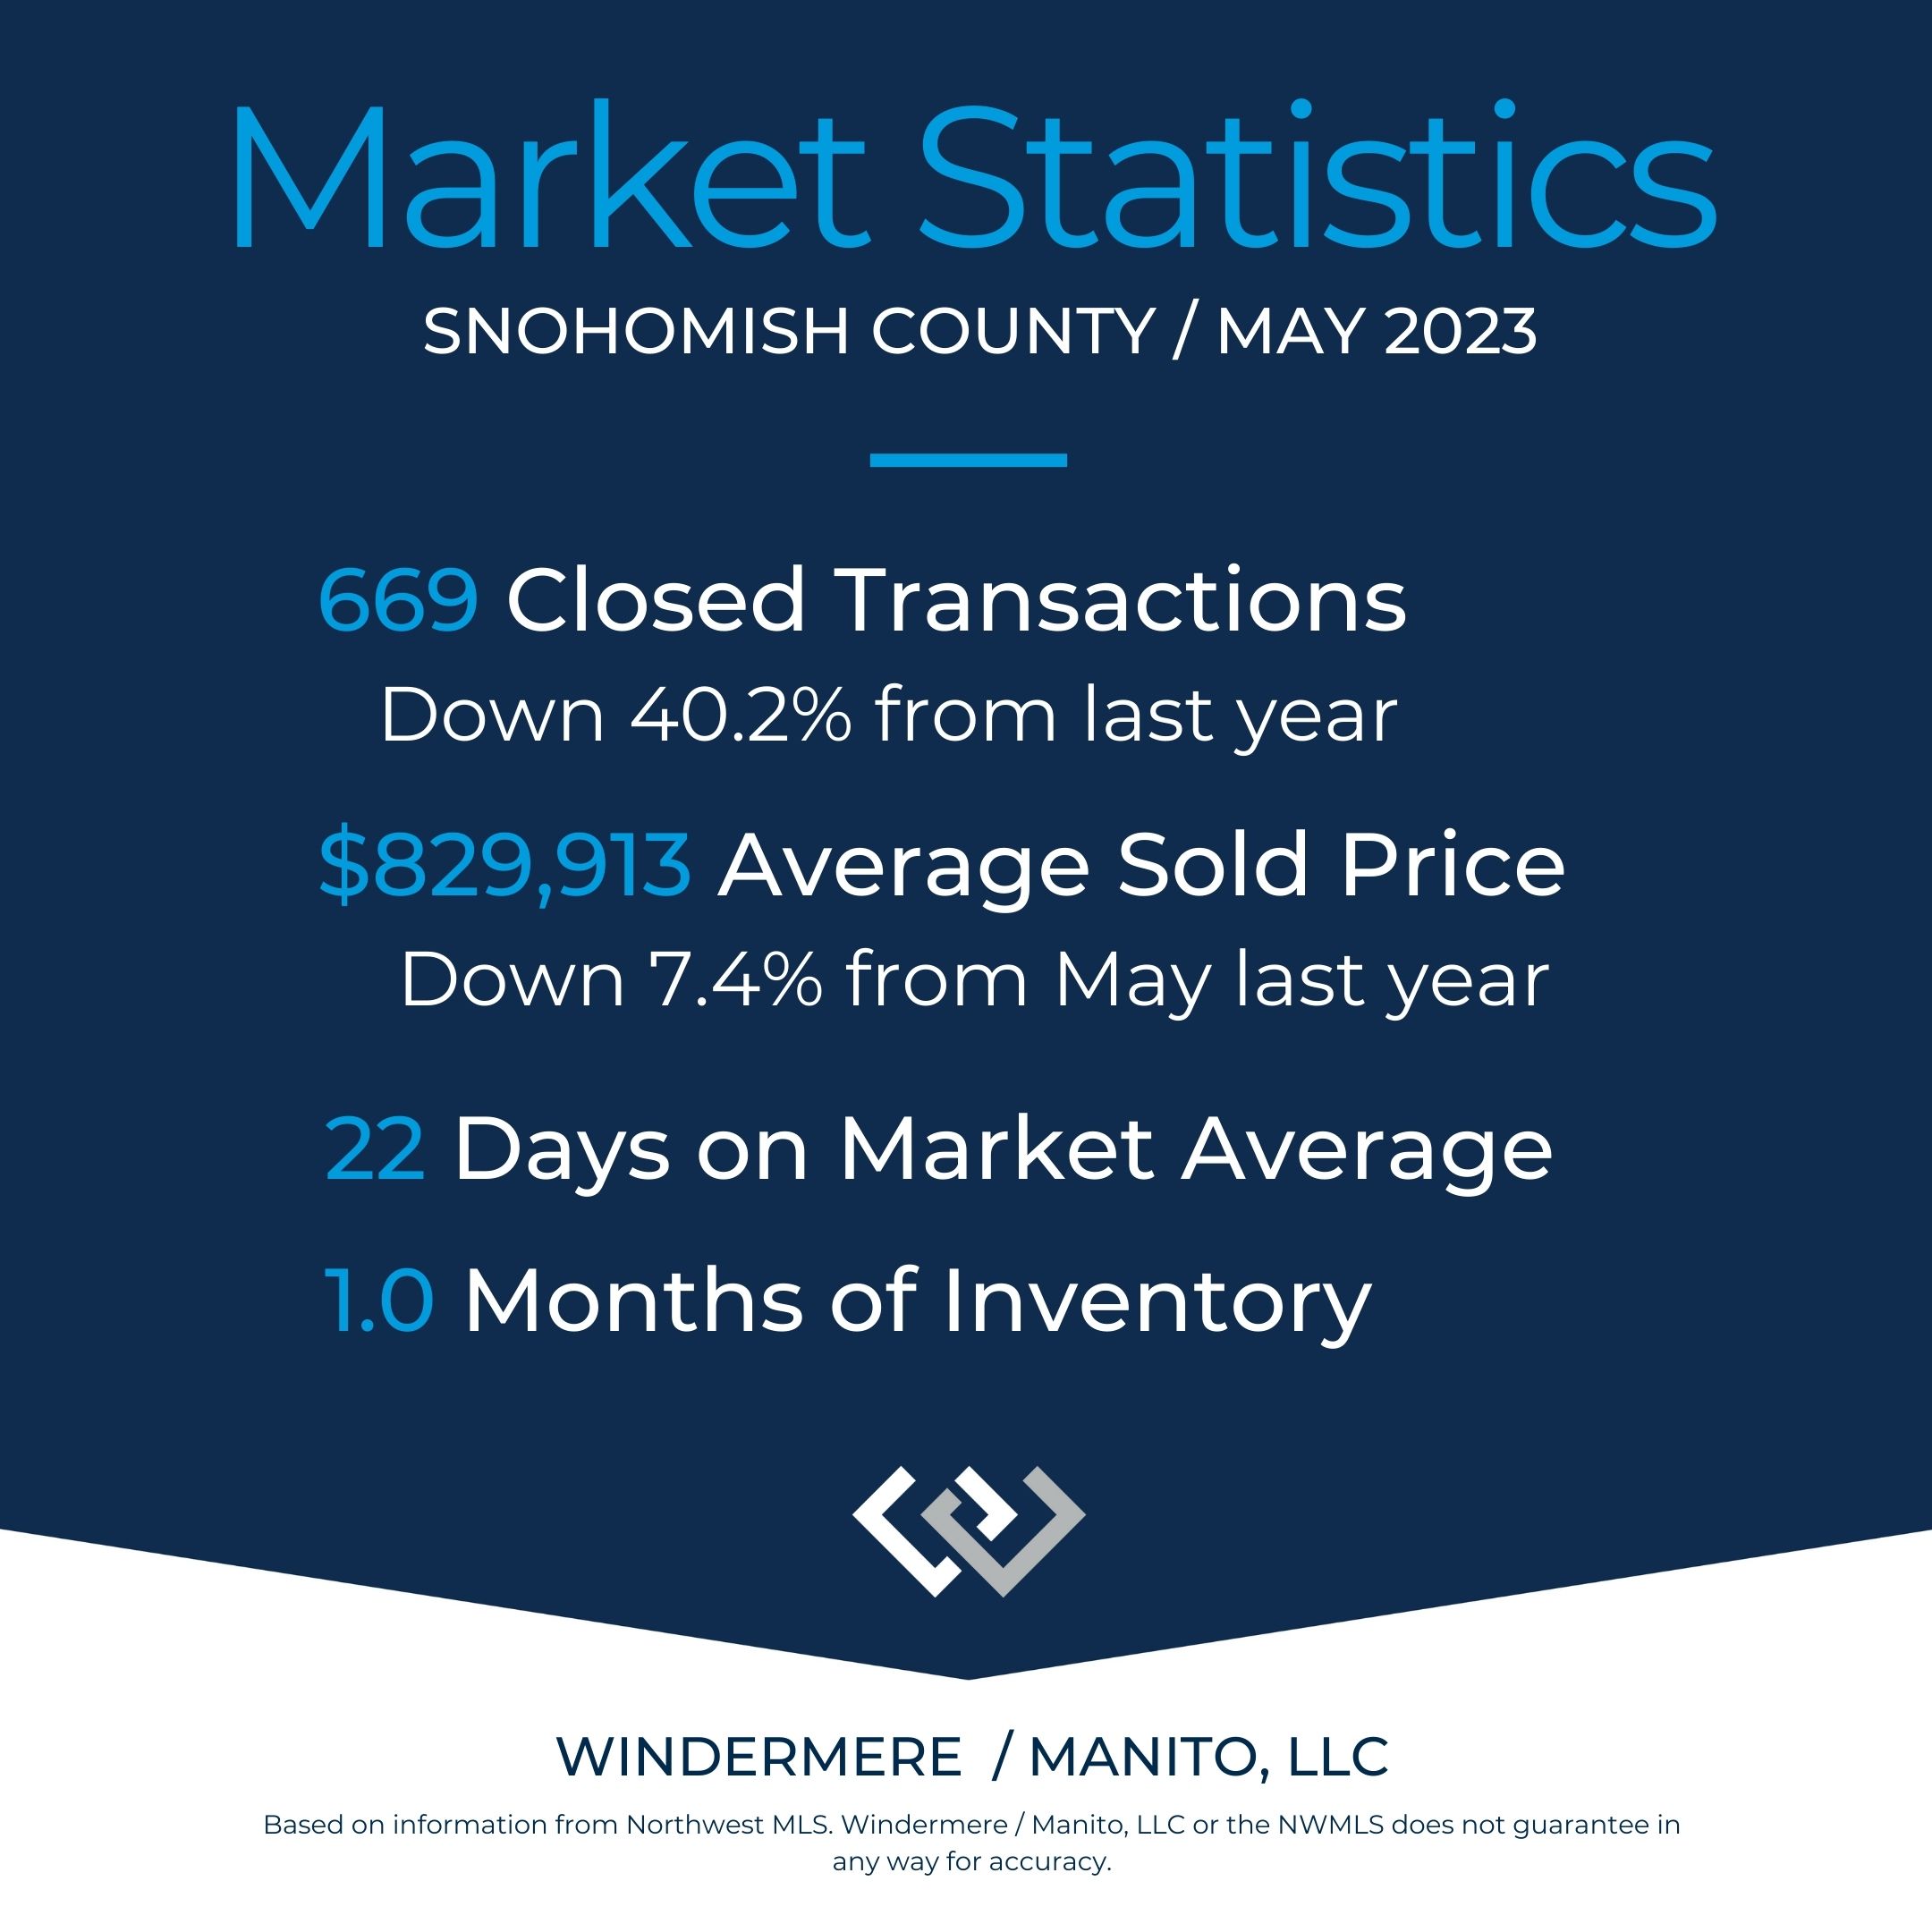 Market Statistics for Snohomish County May 2023